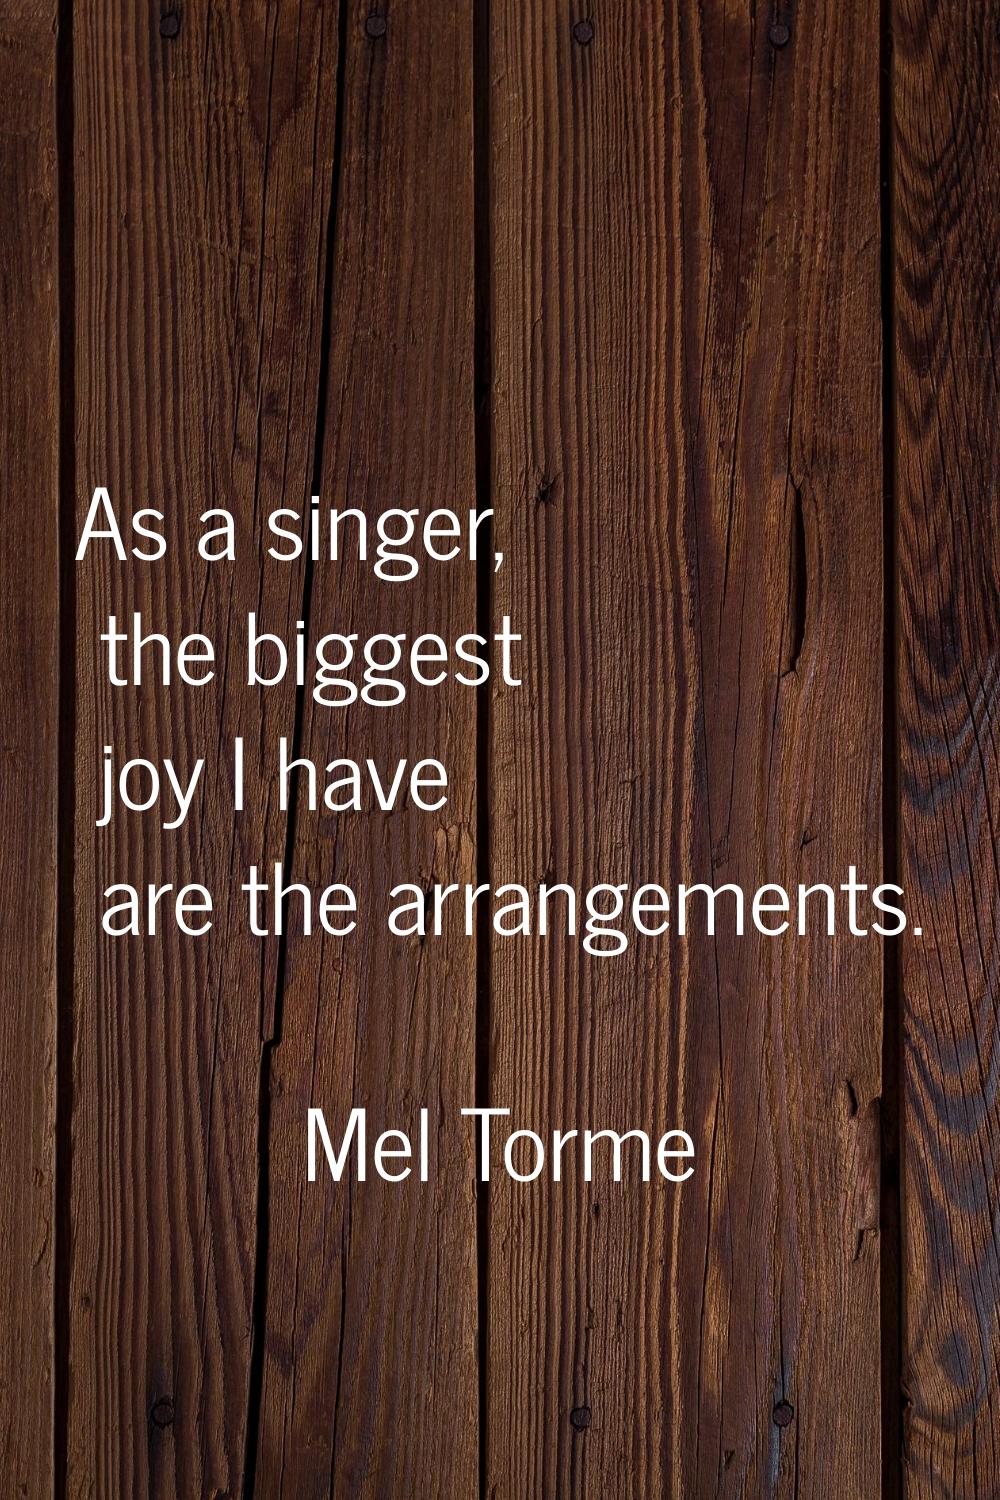 As a singer, the biggest joy I have are the arrangements.